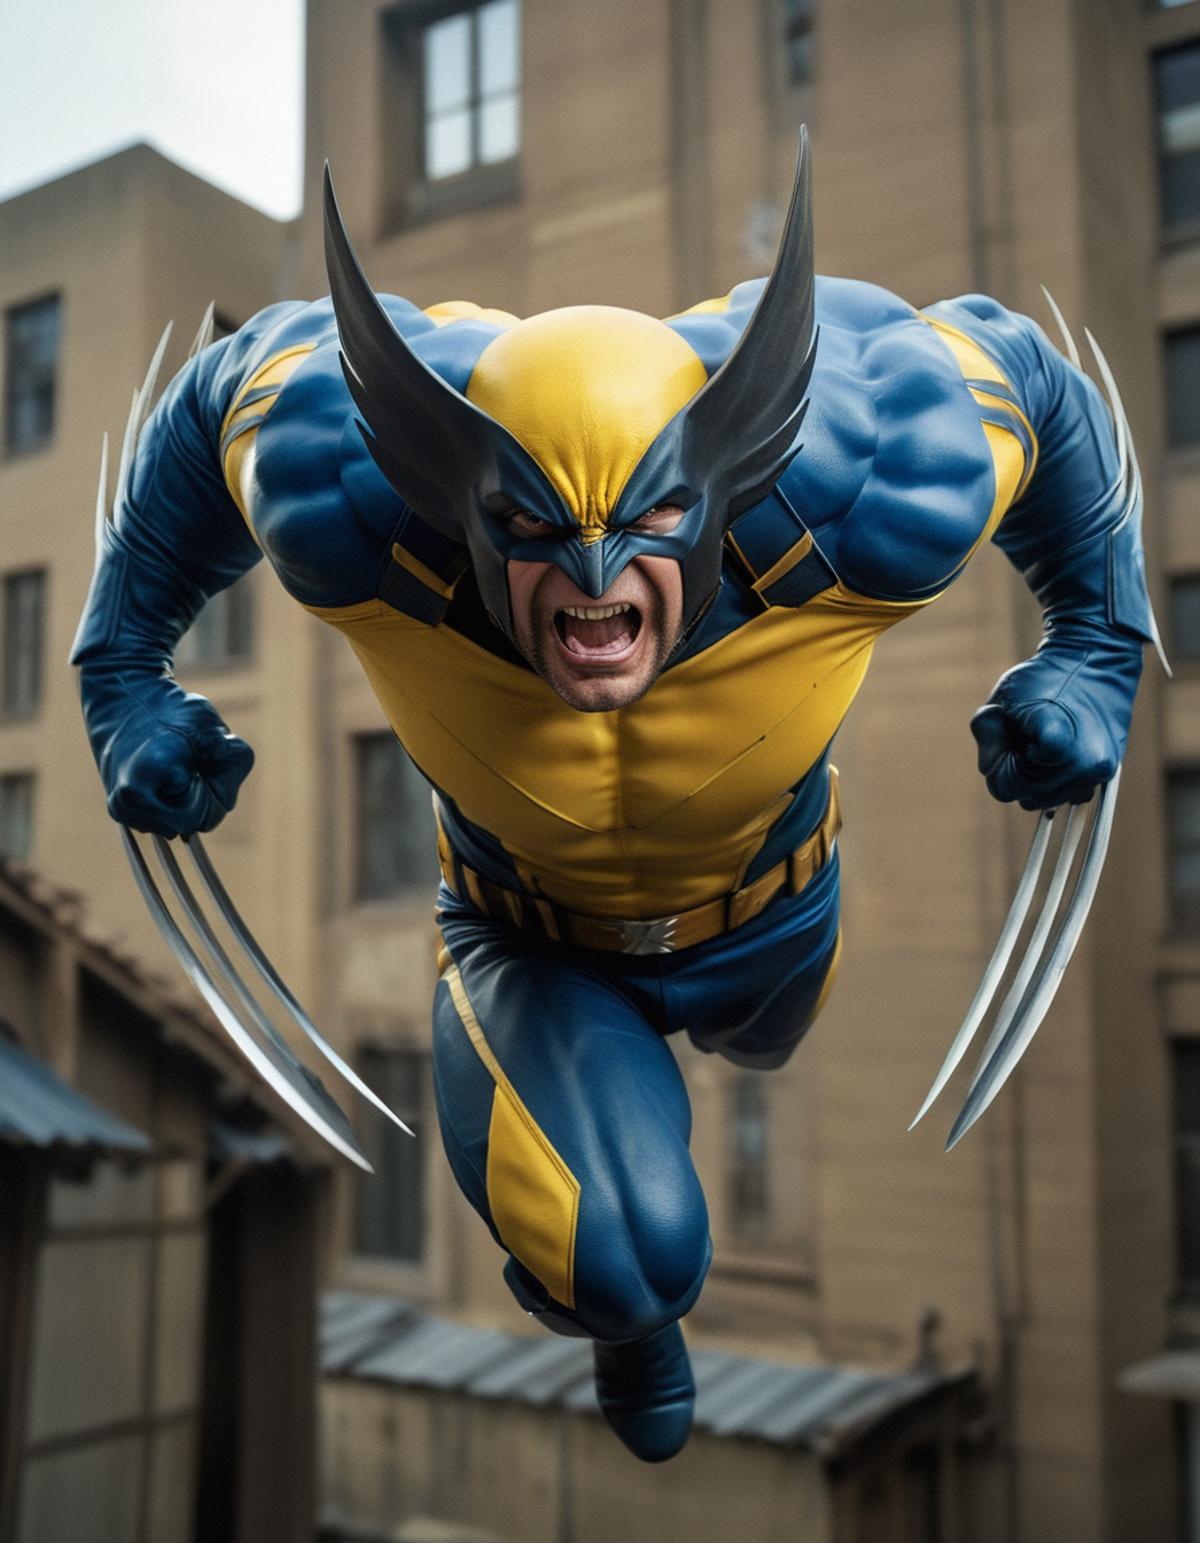 Wolverine in action, wearing blue and yellow, with his mouth open and claws out.